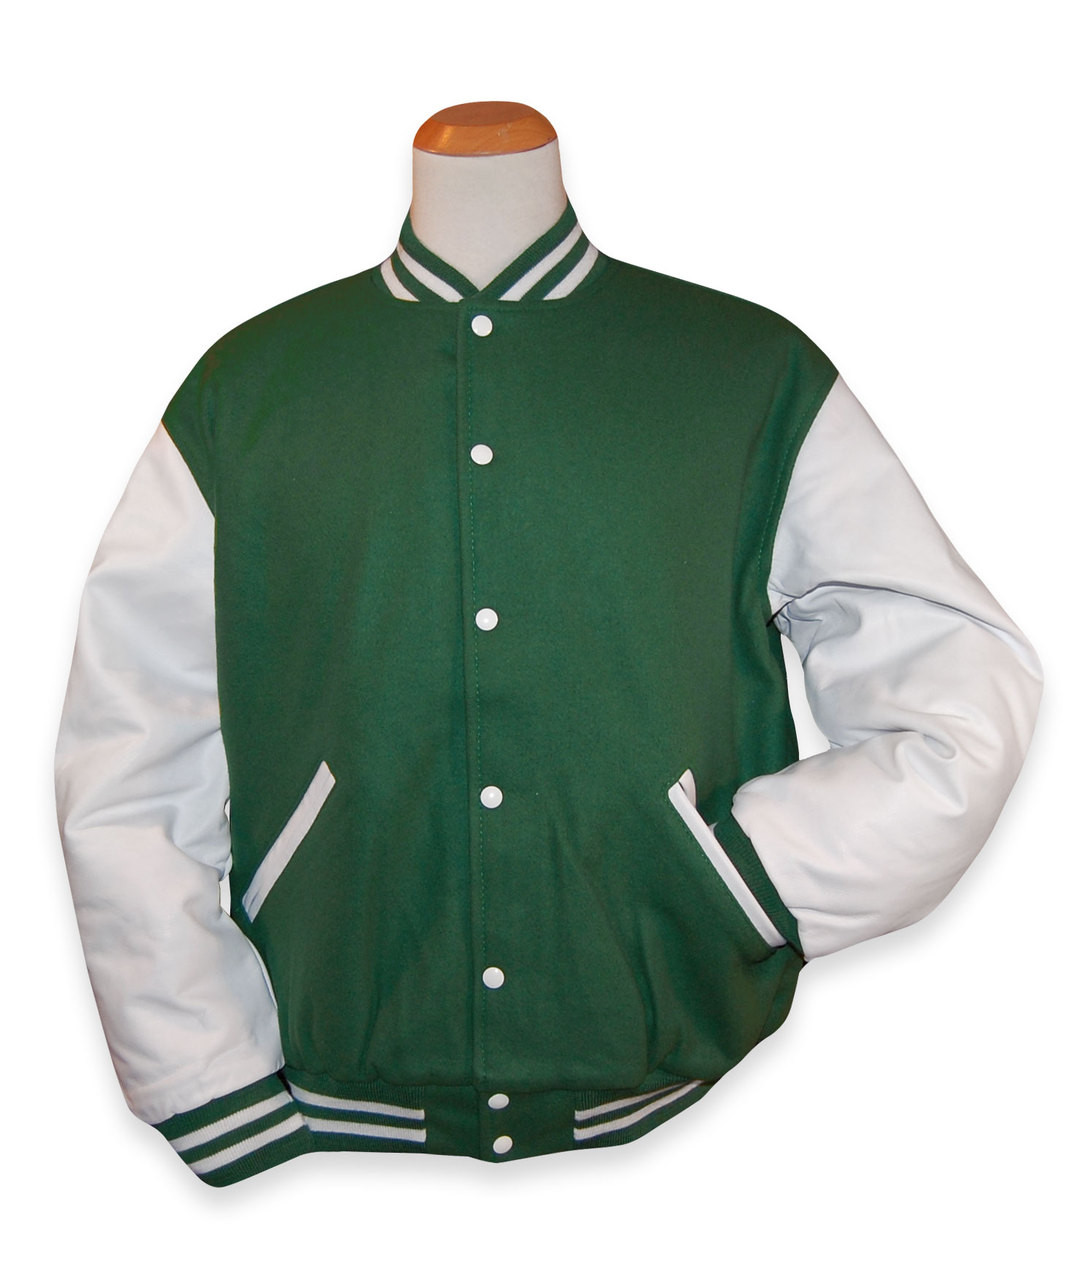 Off-White Eagle Blue and Green Varsity Jacket with Leather Sleeves - Jackets  Masters